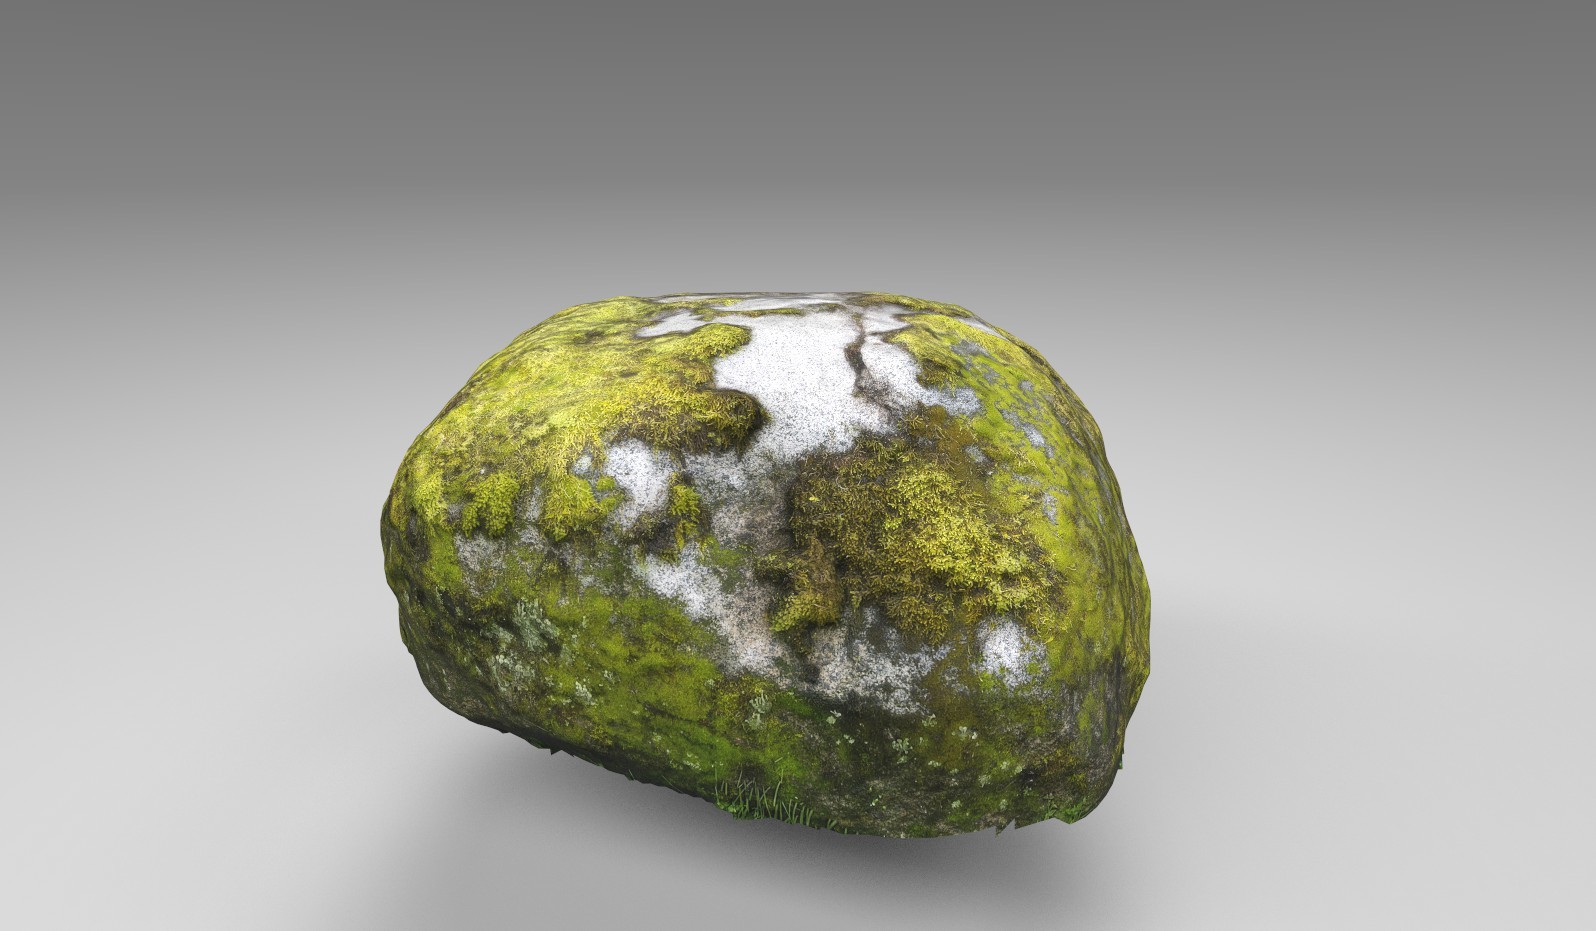 Photogrammetry study of a rock. High poly scan at 12.5k tris